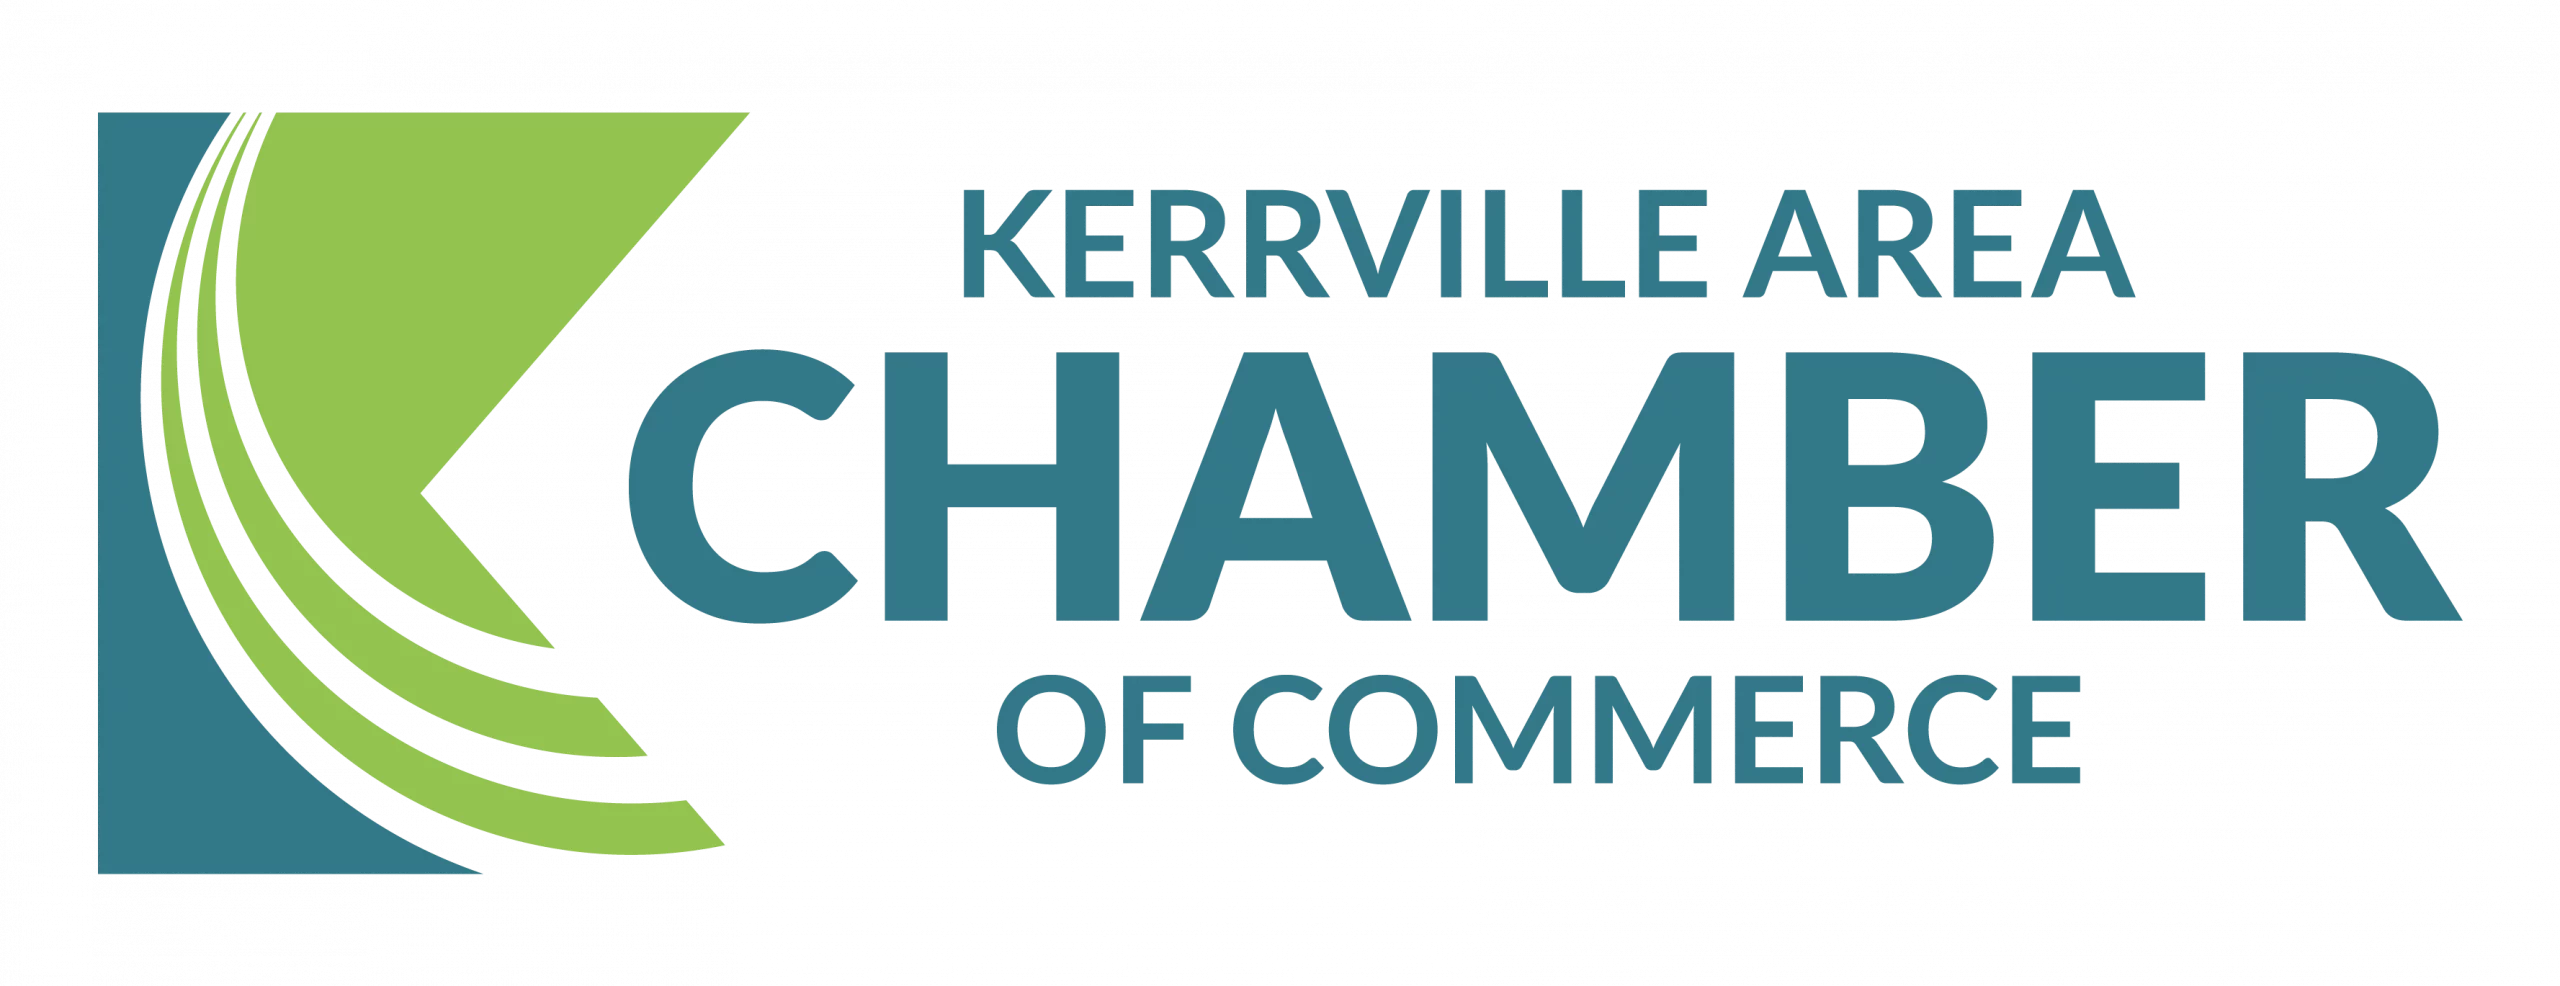 Kerrville-Area-Chamber-of-Commerce_Logo.png